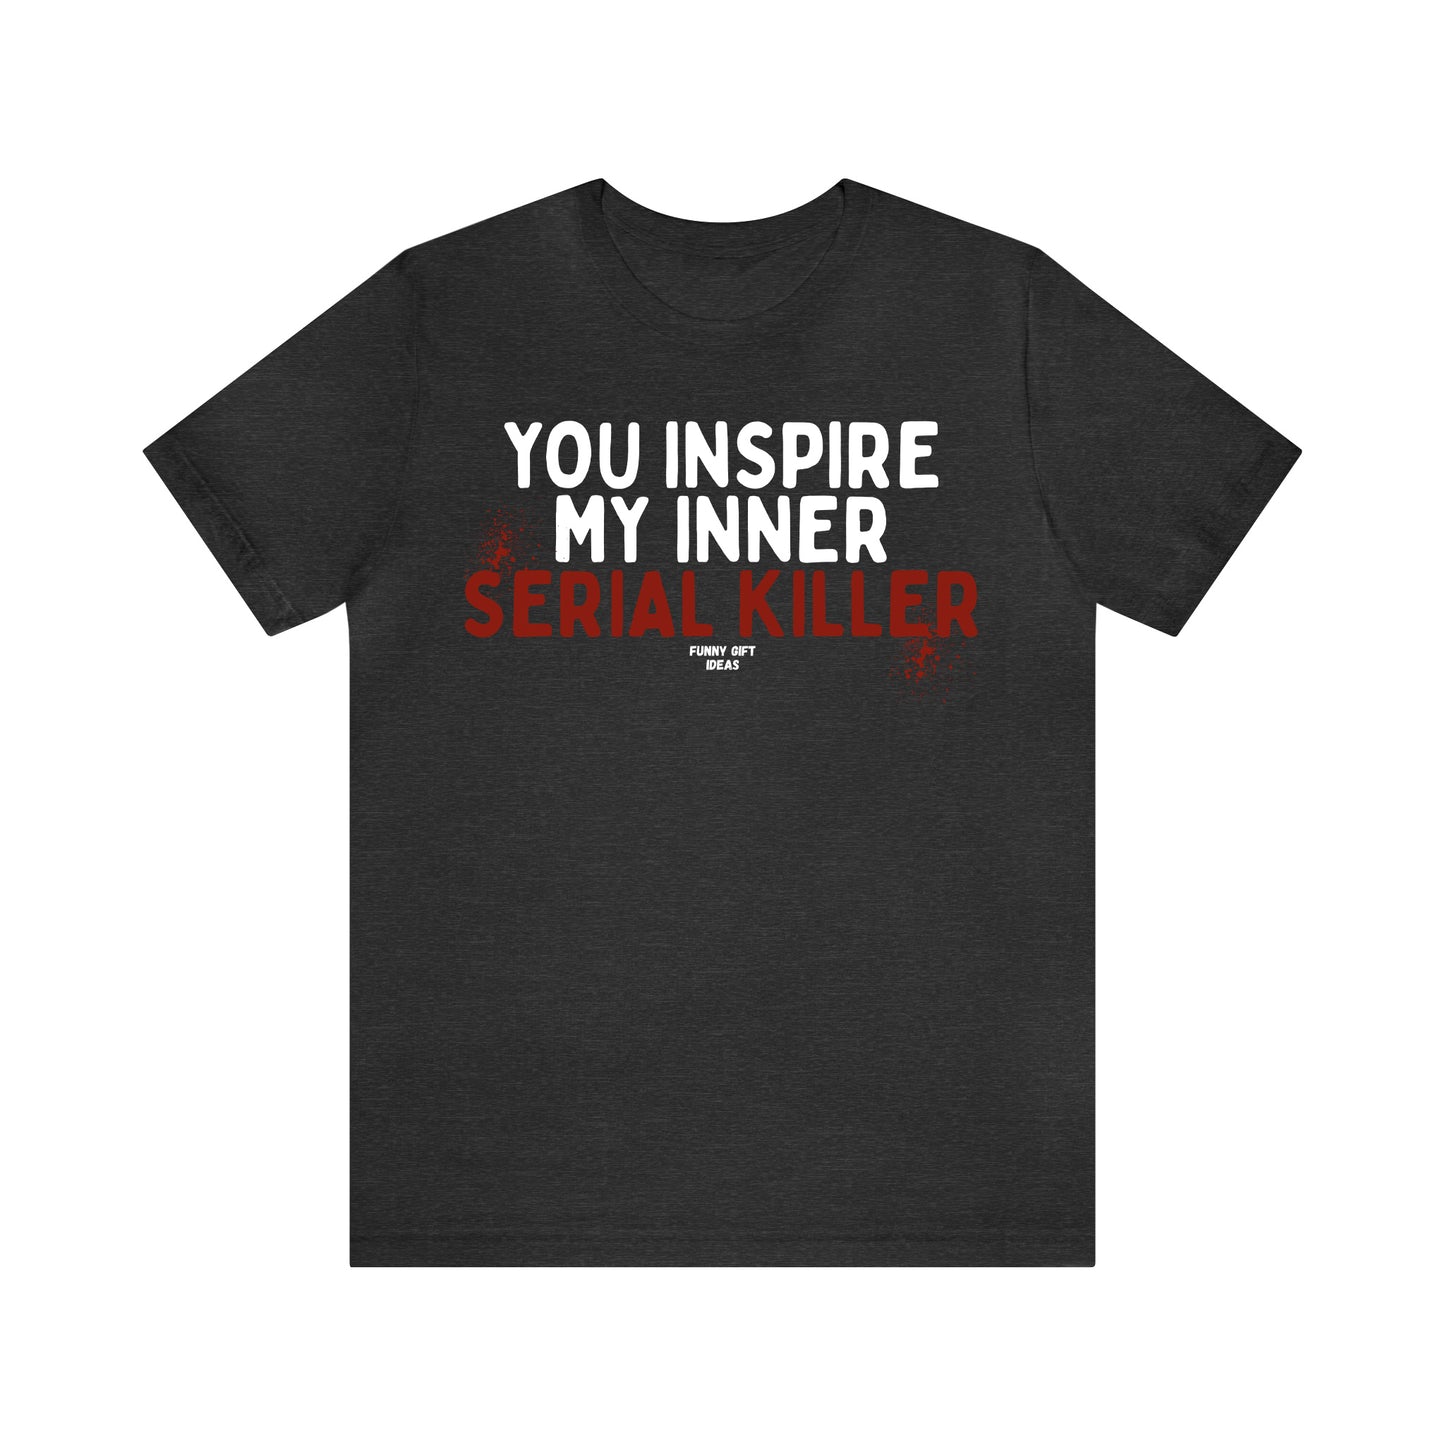 Funny Shirts for Women - You Inspire My Inner Serial Killer - Women's T Shirts